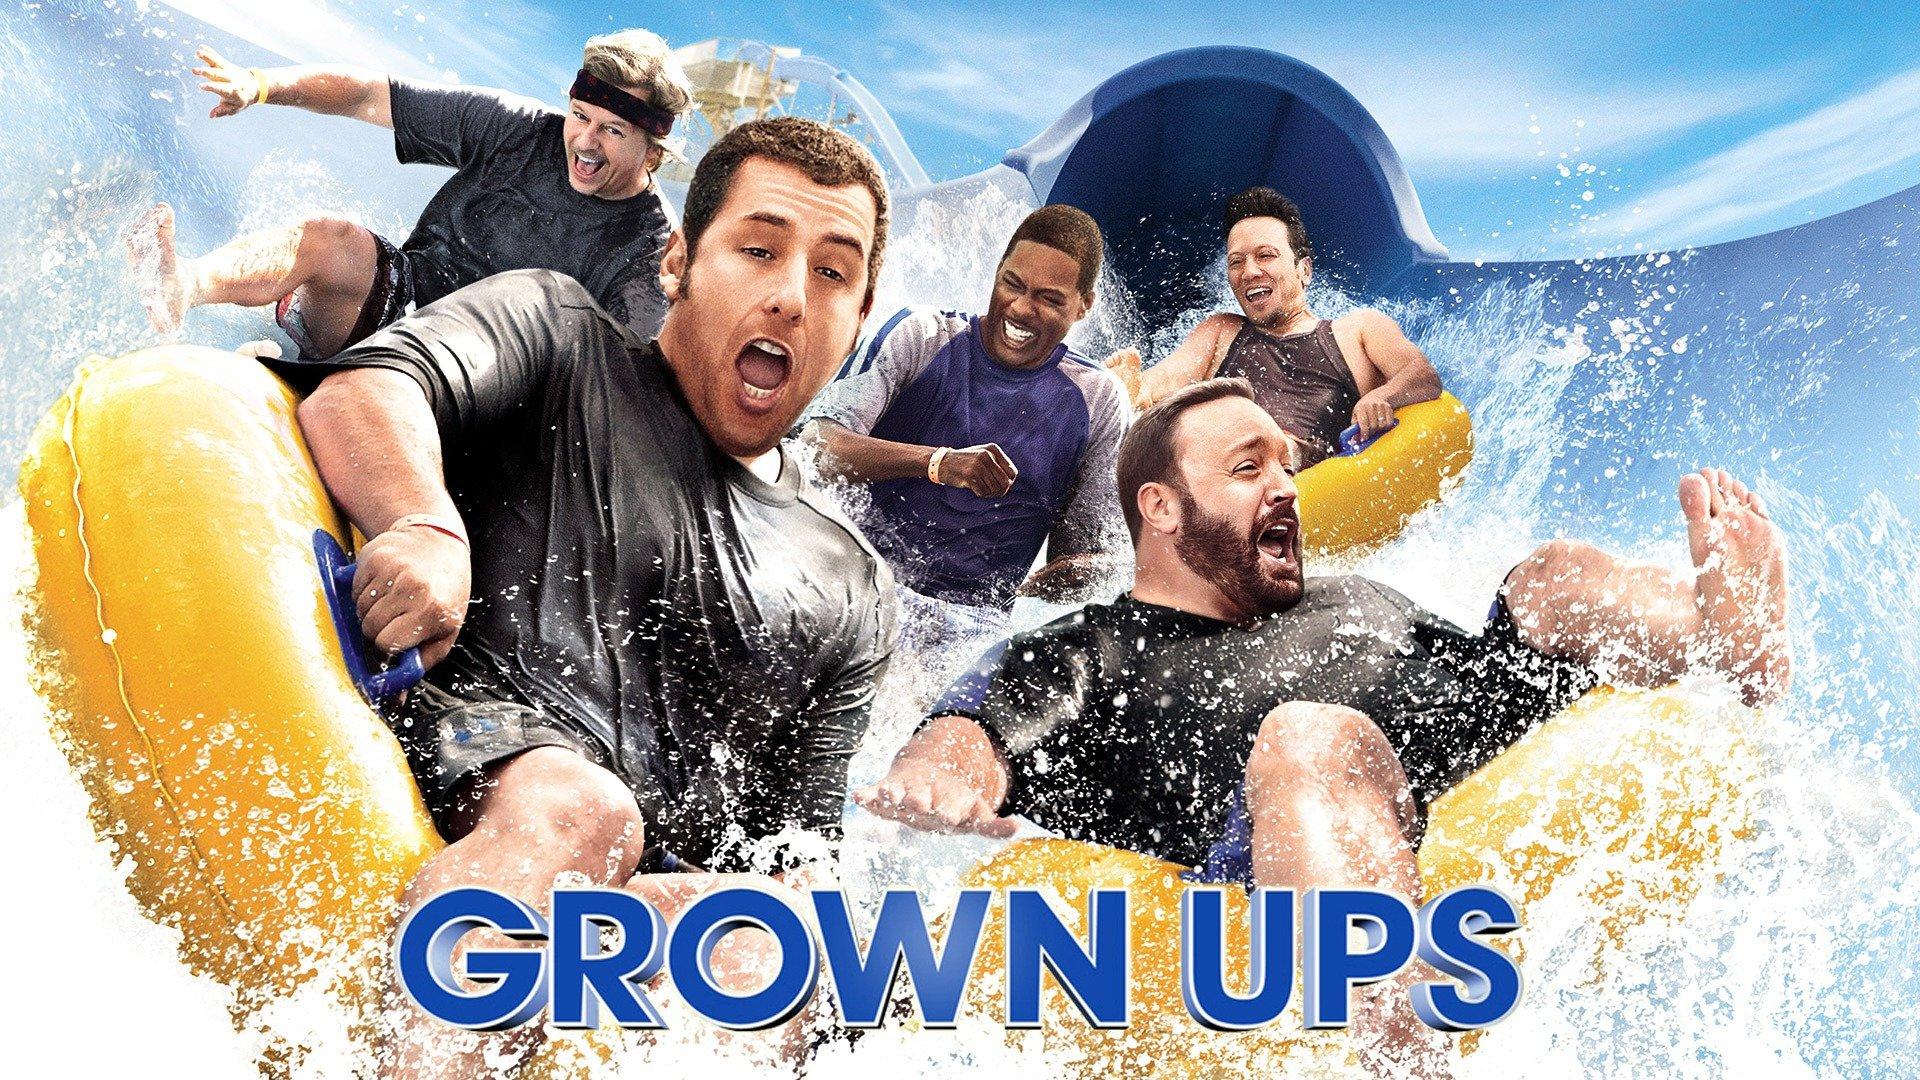 Watch Grown Ups Streaming Online on Philo (Free Trial)